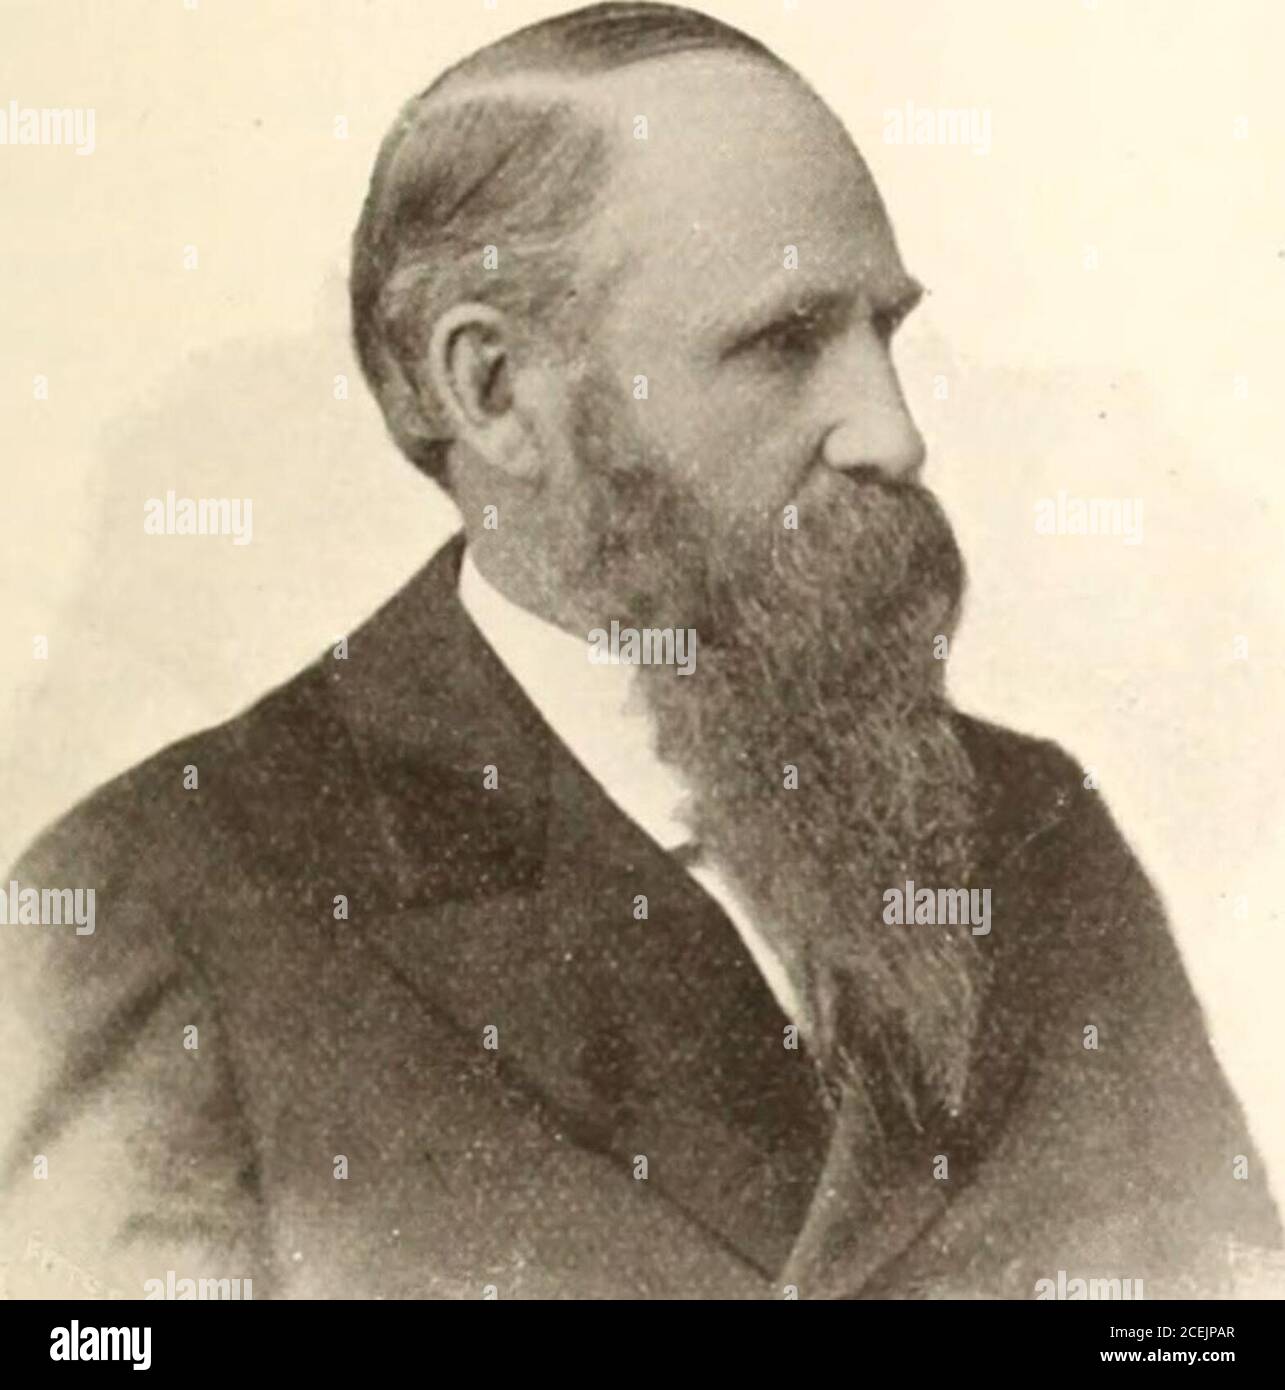 . The American homoeopathist. fever with which he isbed-fast, and that the attending medical councilagrees in holding out hope that he will recover.We look forward with hope and expectation forhis return to the pages of the Century. — Dr. Dewitt G. Wilcox of Buffalo has beenat the Cleveland University of Medii ine on oneor two occasions, filling the chair of surgery and 1 ologj which Dr. Fisher, owing to his illness, was unable to fill. This is the chair belongingin Dr. J. Kent Sanders, who was absent inEurope. The American Homeopathist, Issiini Tviict a Month.This Journal is published for its Stock Photo